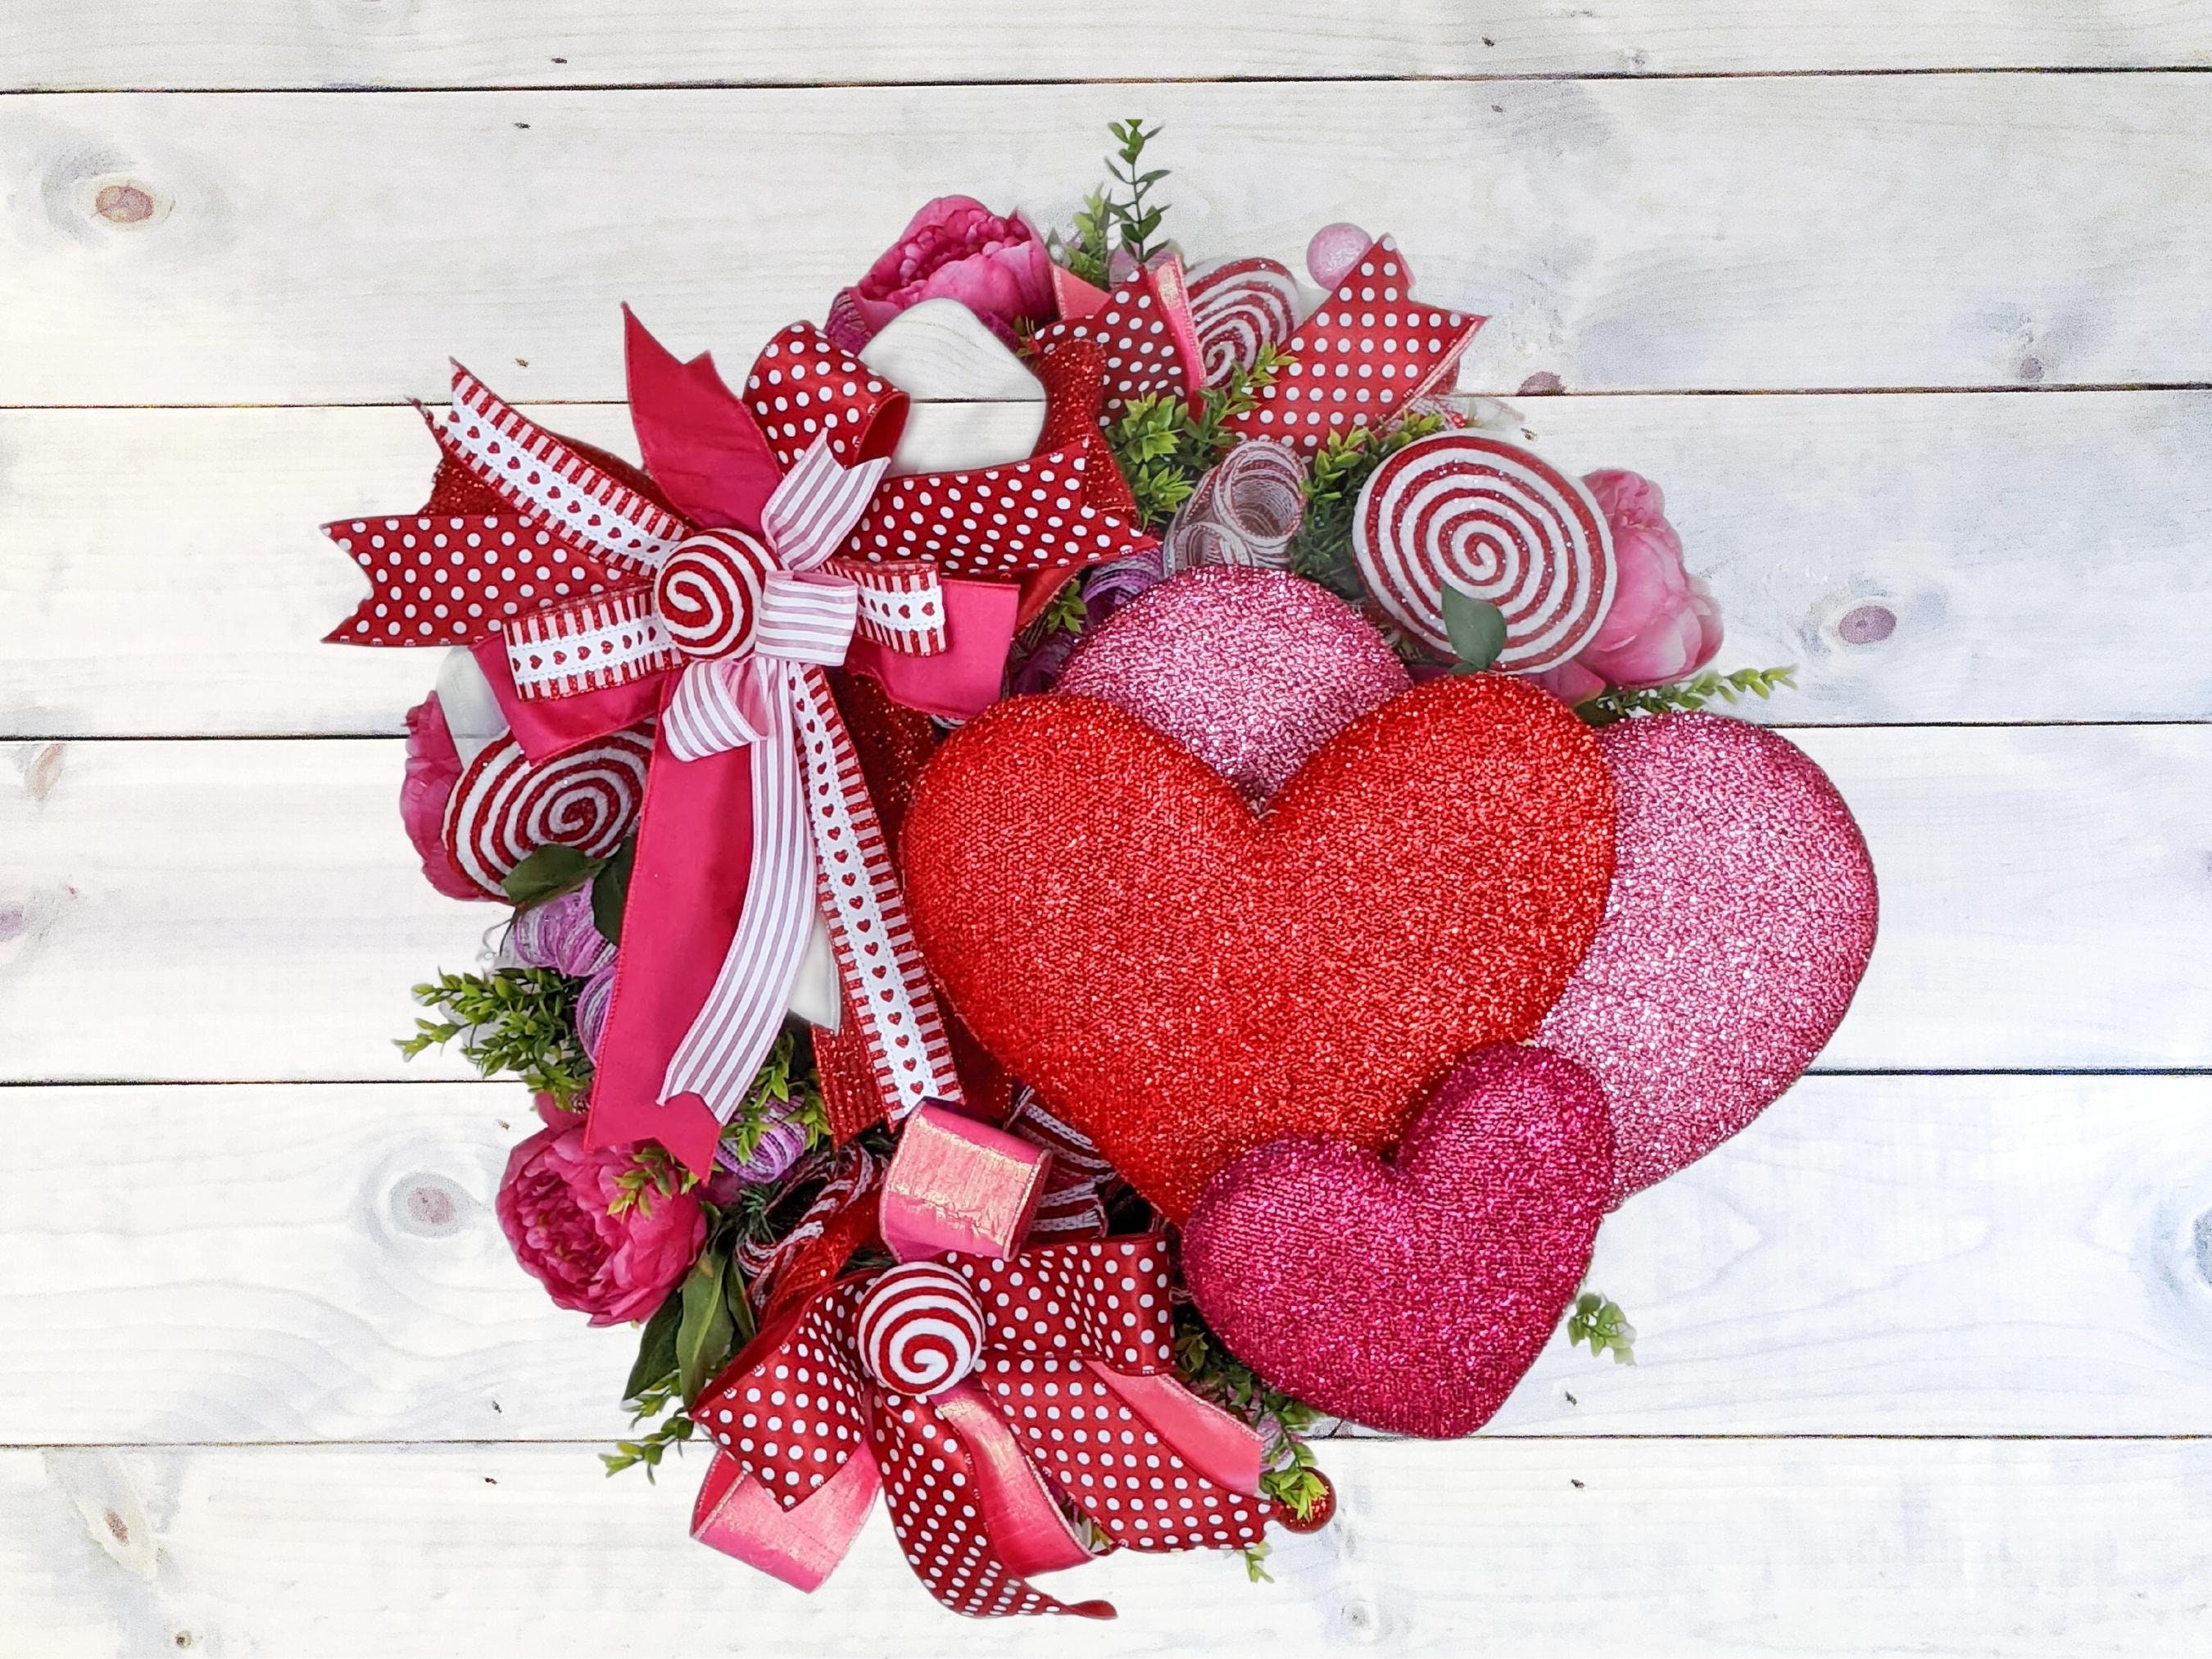 EXTRA LARGE VALENTINES Heart Wreath,heart Wreath,front Door Wreath, valentines Day Wreath, Wildflower Wreath,valentines Wreath,heart Decor 